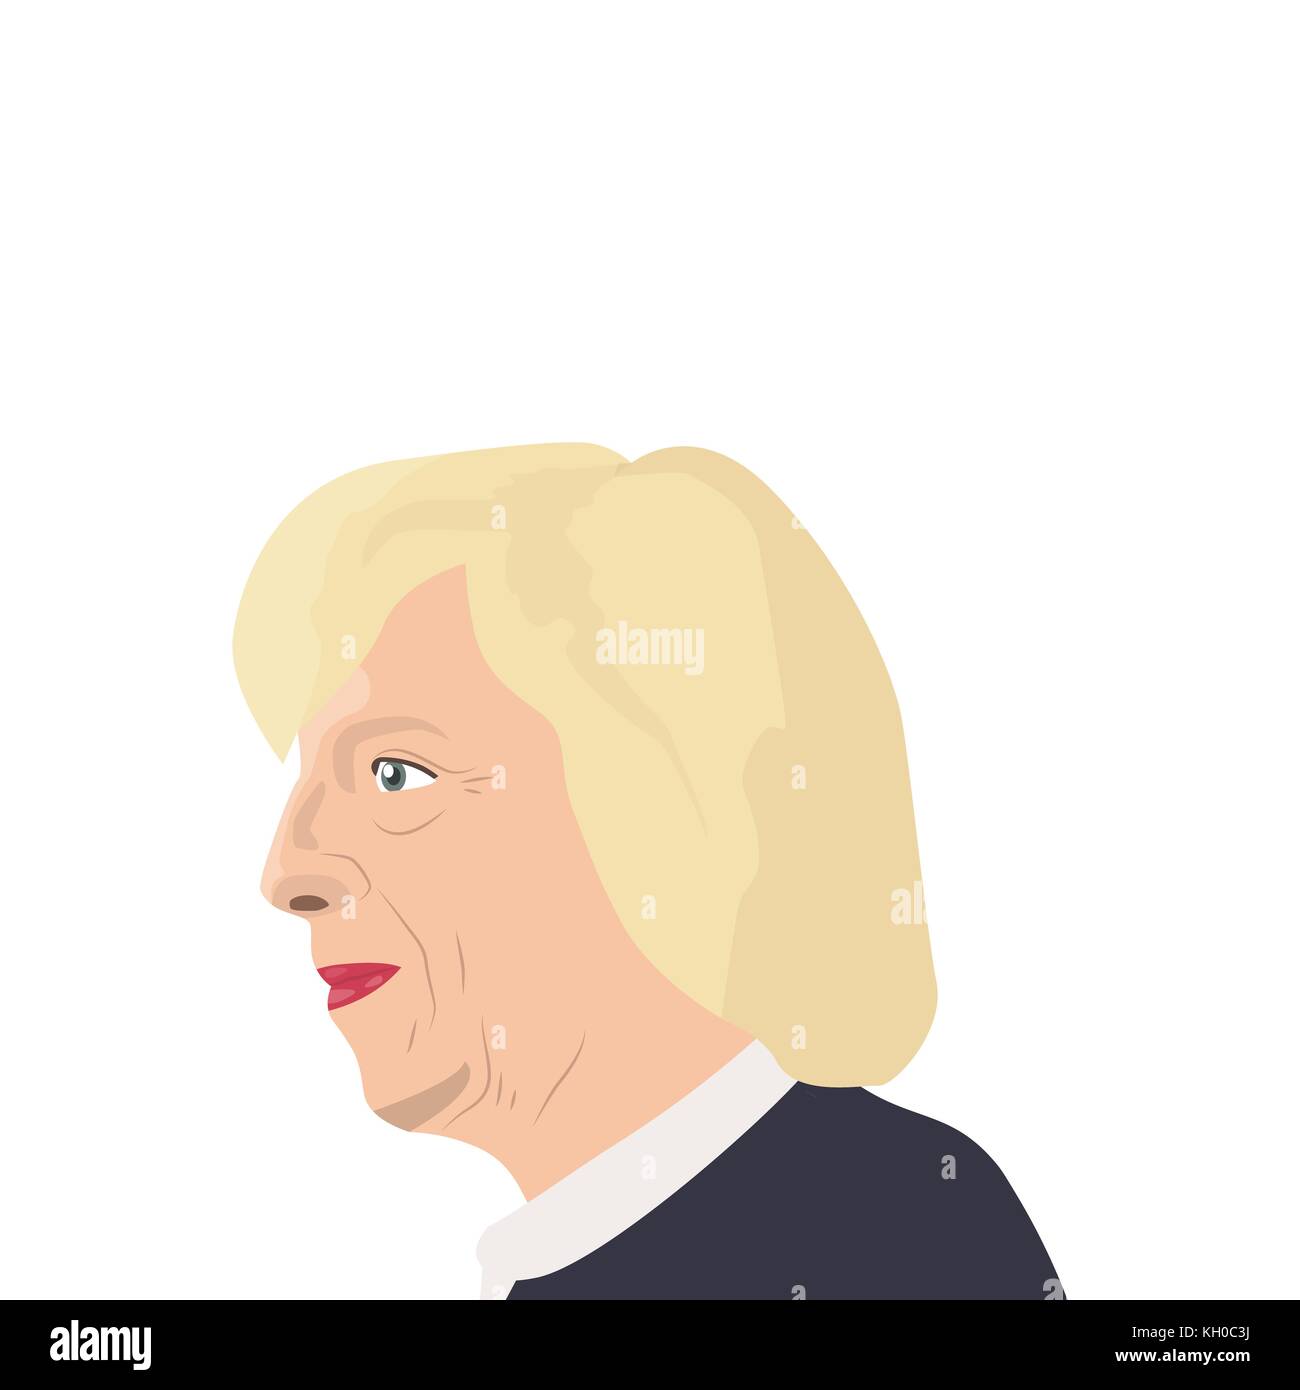 November 11, 2017. Editorial illustration of Theresa May portrait - the Prime Minister of the United Kingdom and the Leader of the Conservative Party  Stock Vector